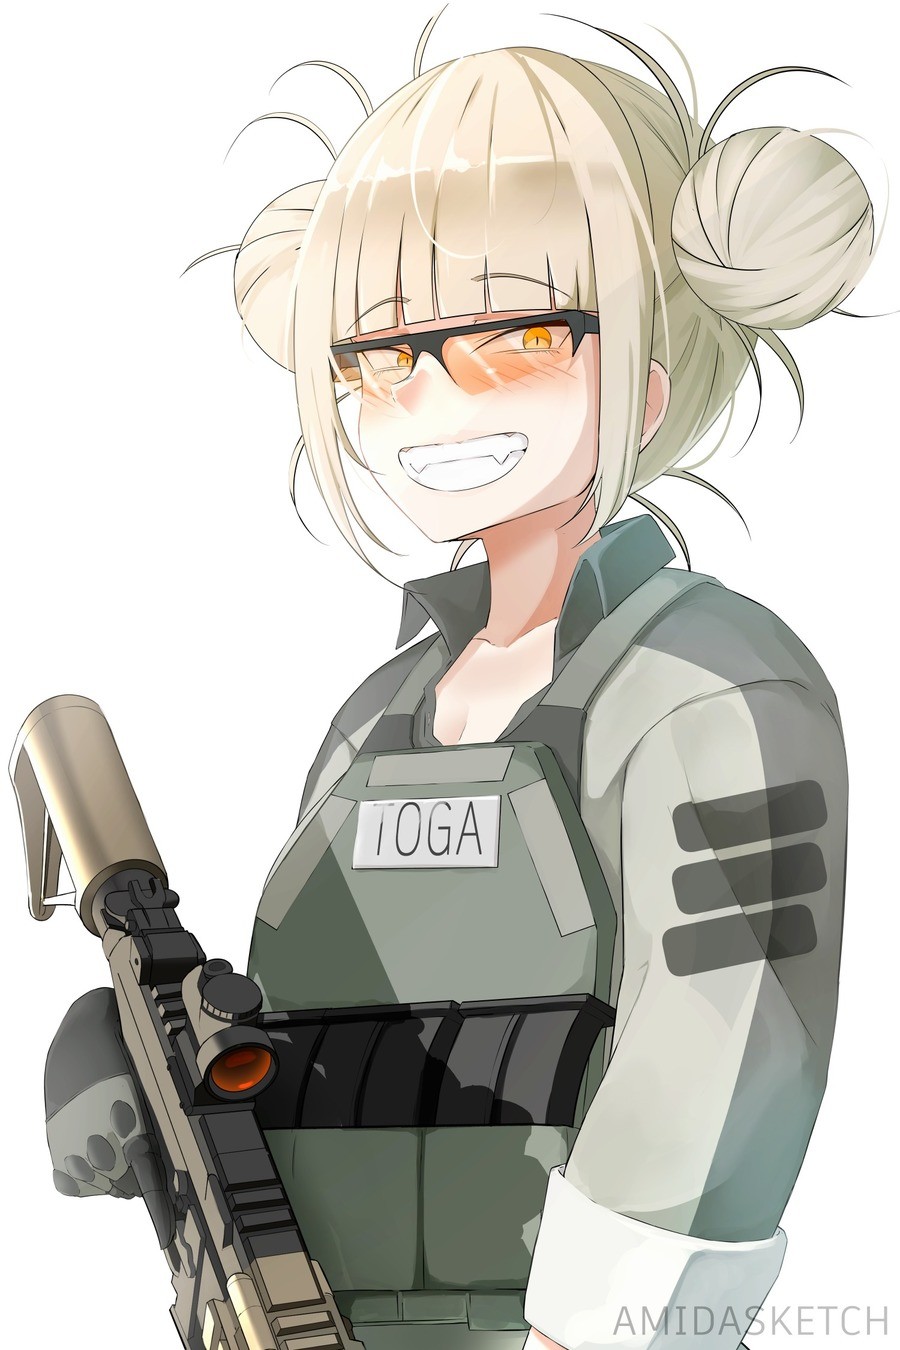 Daily Toga - 830: Tactical Toga. join list: DailyToga (477 subs)Mention History Source: .